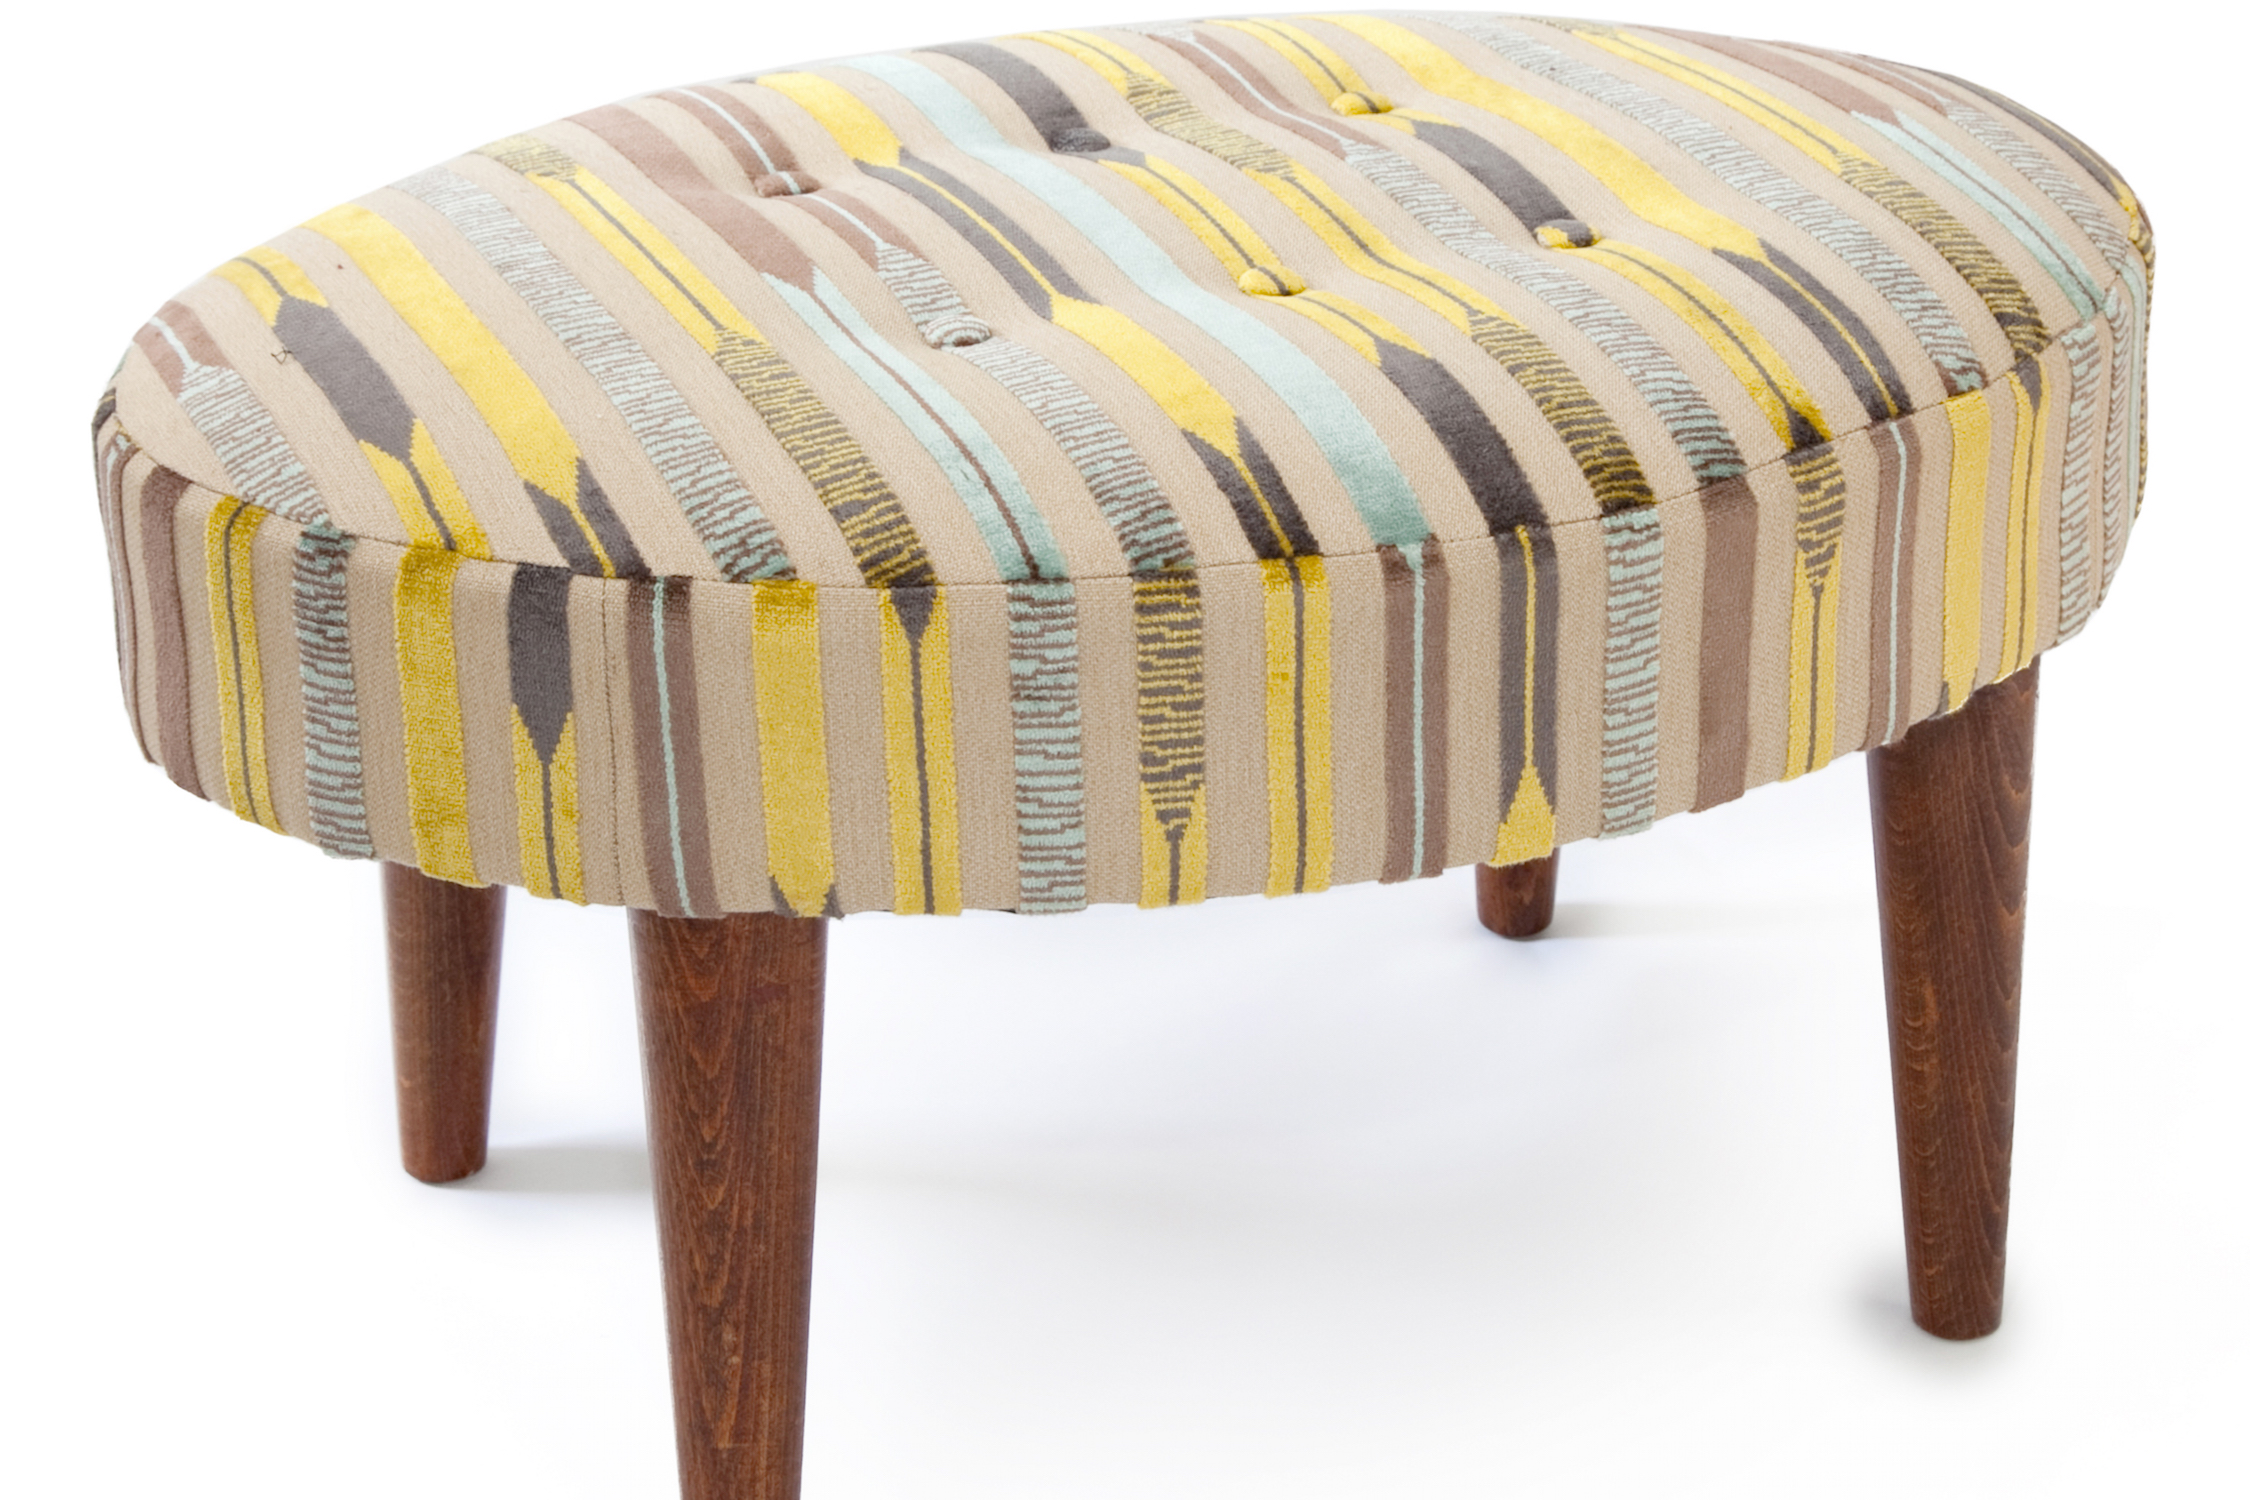 Footstool Gallery | The Bespoke Footstool Co | Made to measure